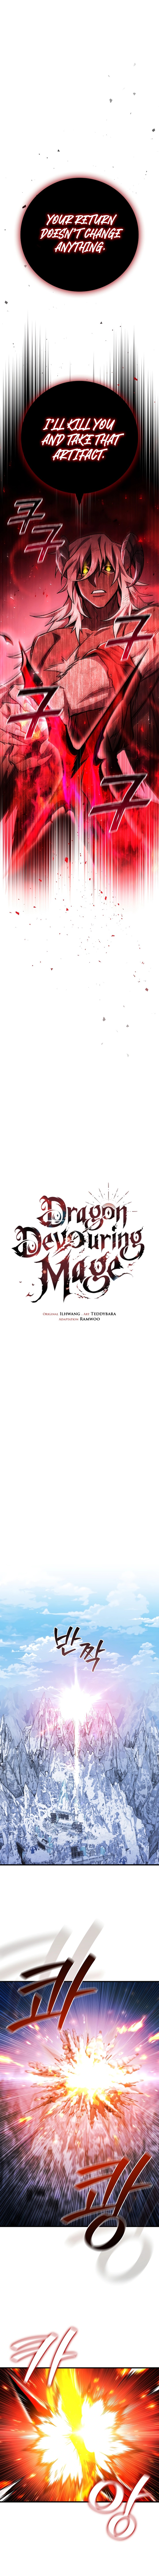 Dragon-Devouring Mage, Chapter 52 image dragon_devouring_mage_52_1